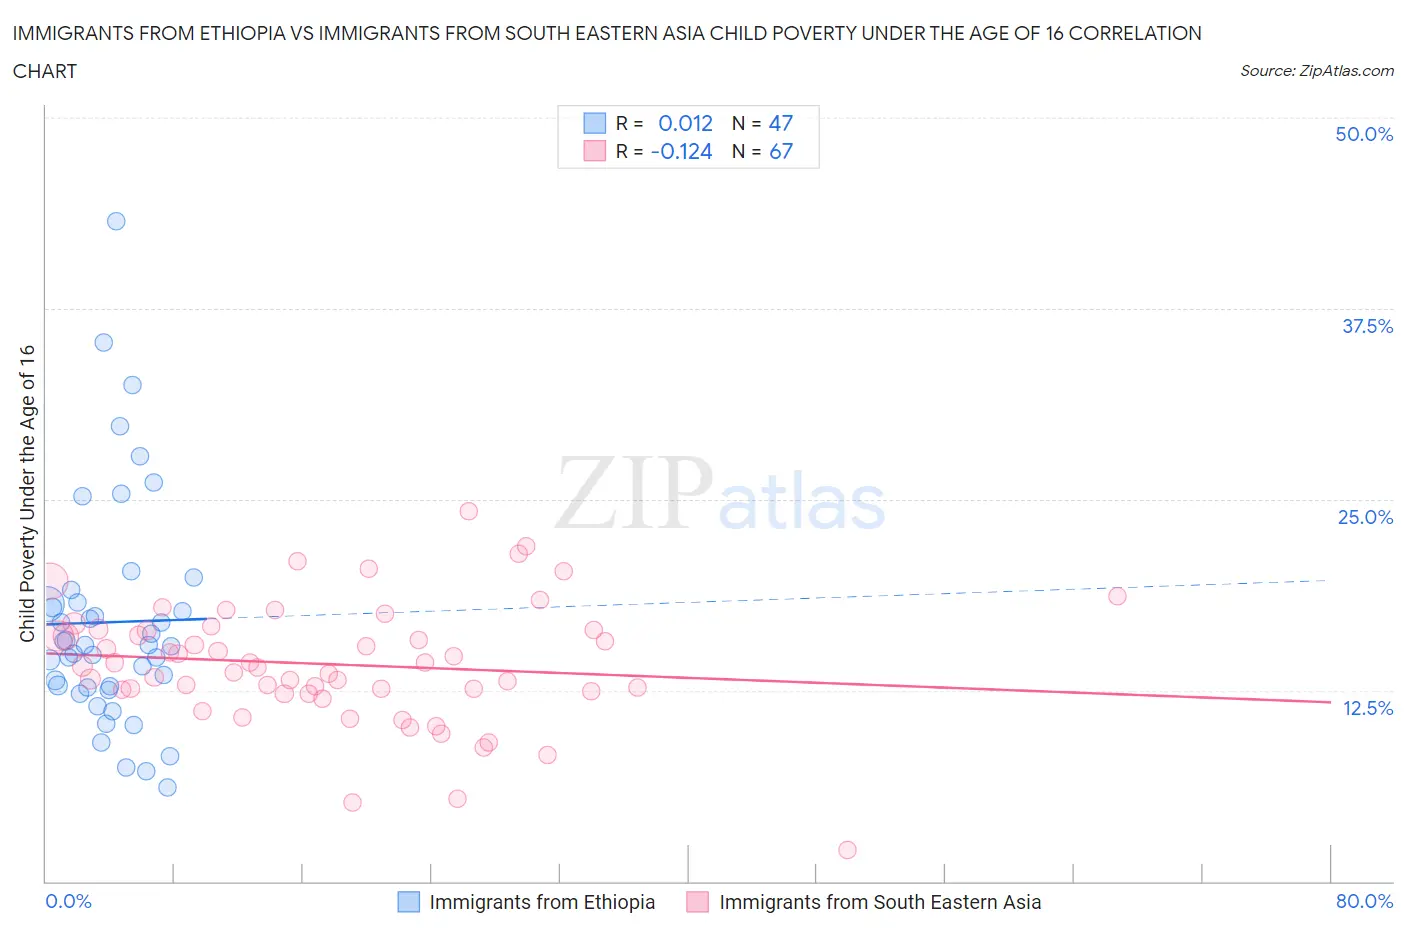 Immigrants from Ethiopia vs Immigrants from South Eastern Asia Child Poverty Under the Age of 16